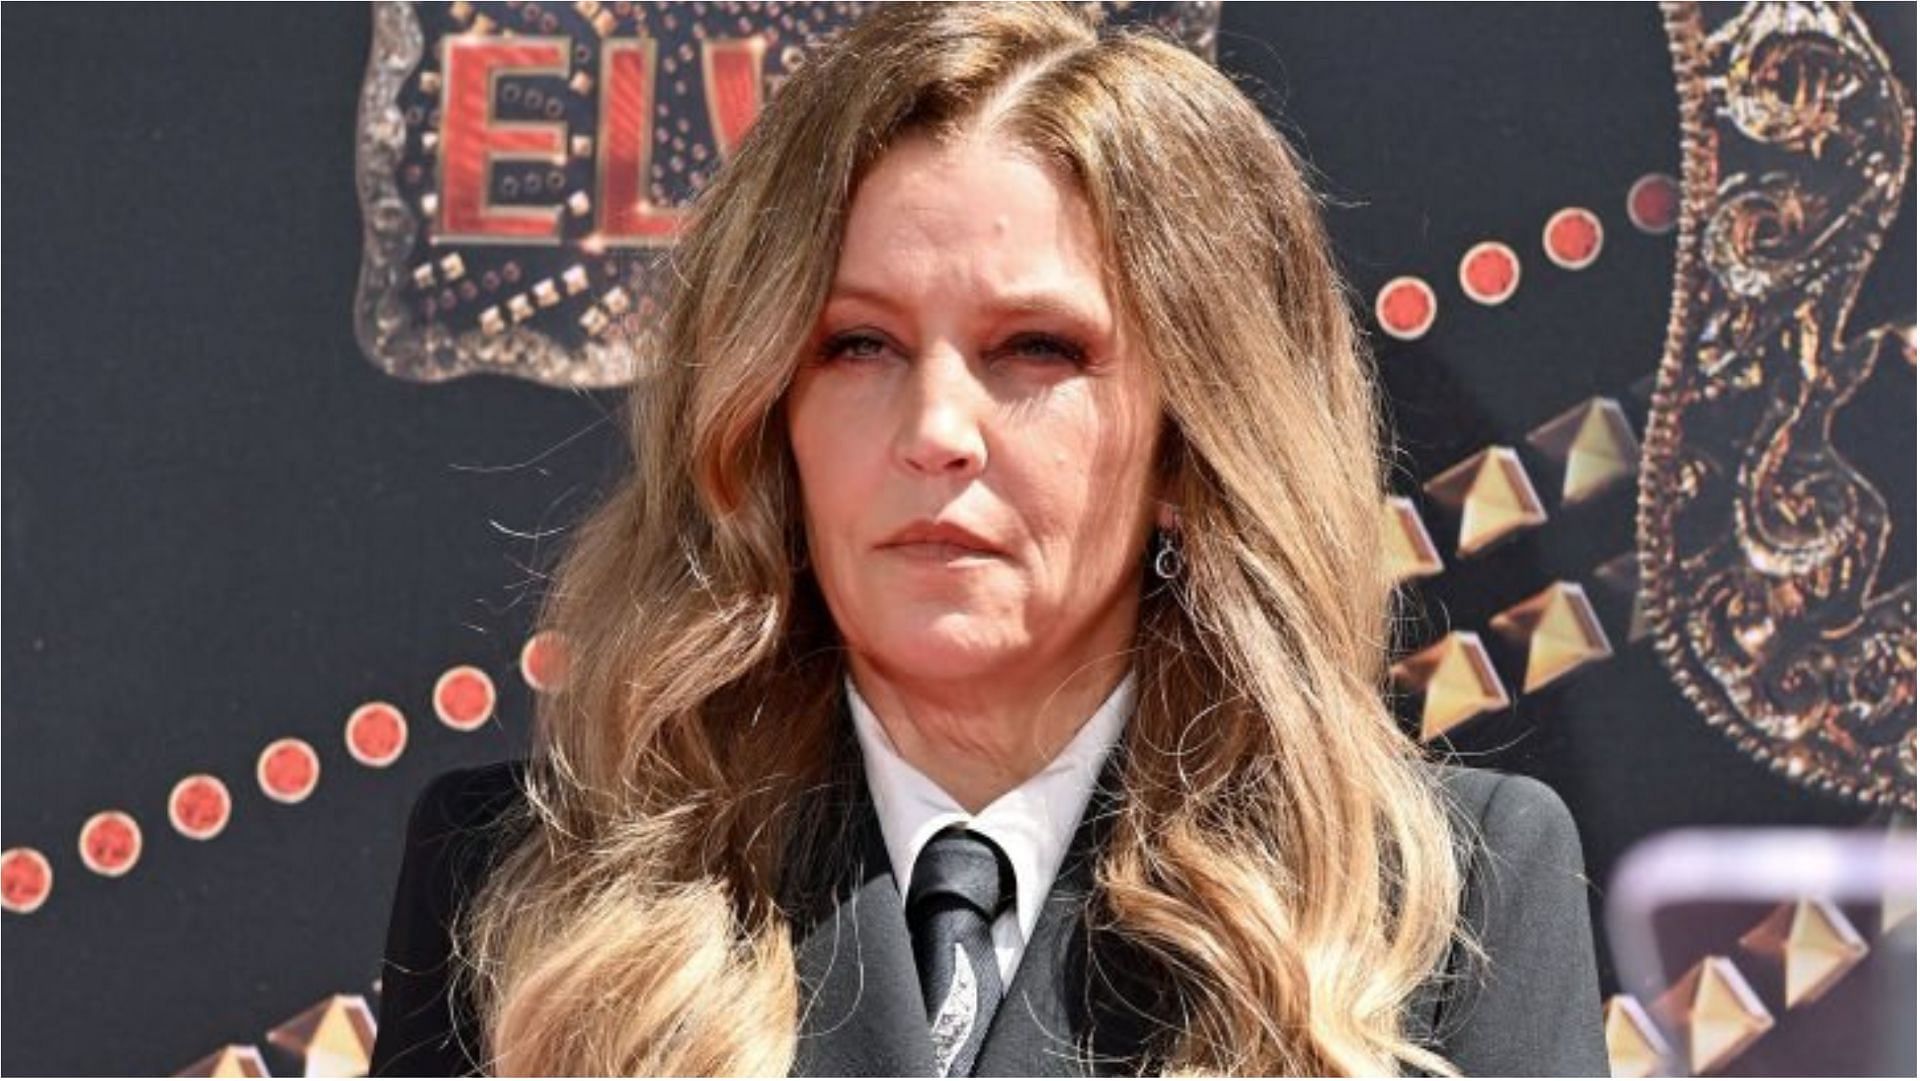 Lisa Marie Presley&#039;s health issues affected her a lot over the years (Image via Axelle/Bauer-Griffin/Getty Images)